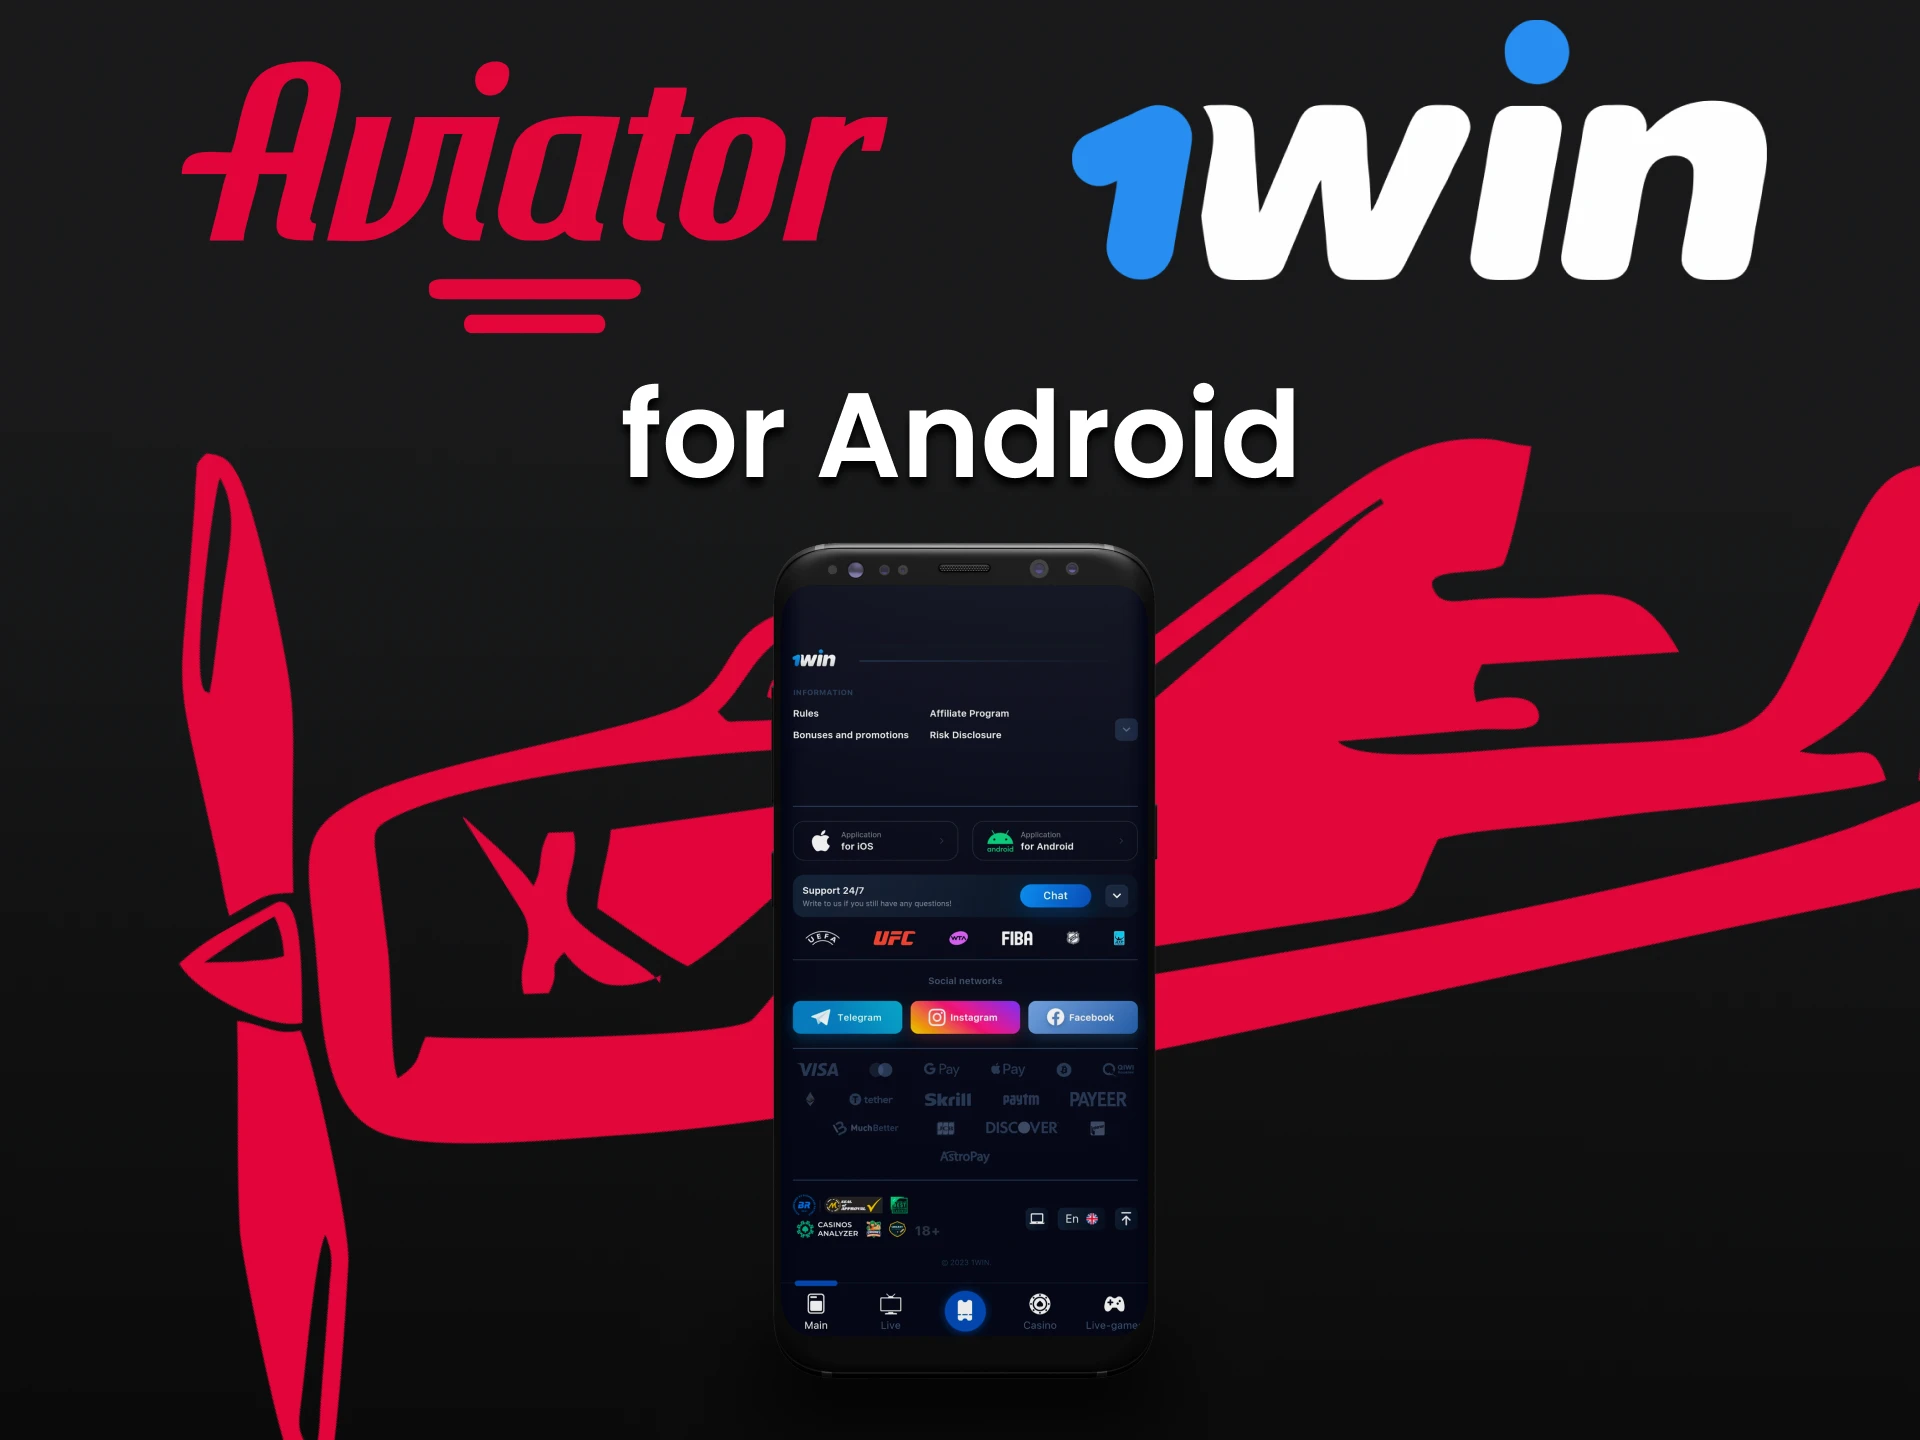 Download the 1win app to play Aviator.